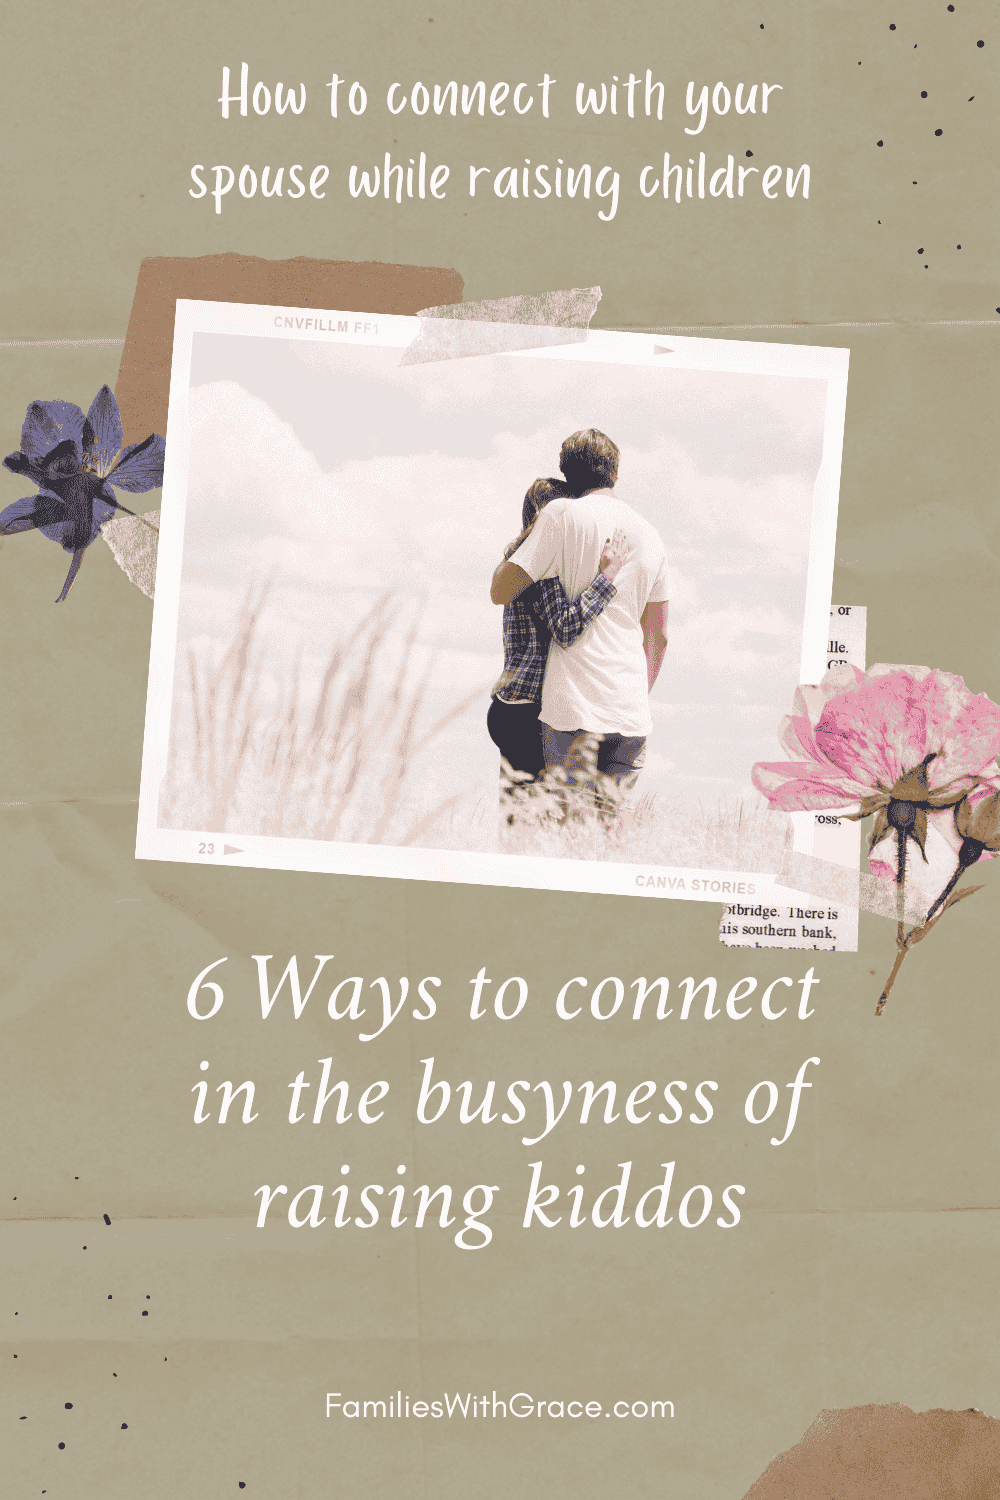 How to connect with your spouse while raising children